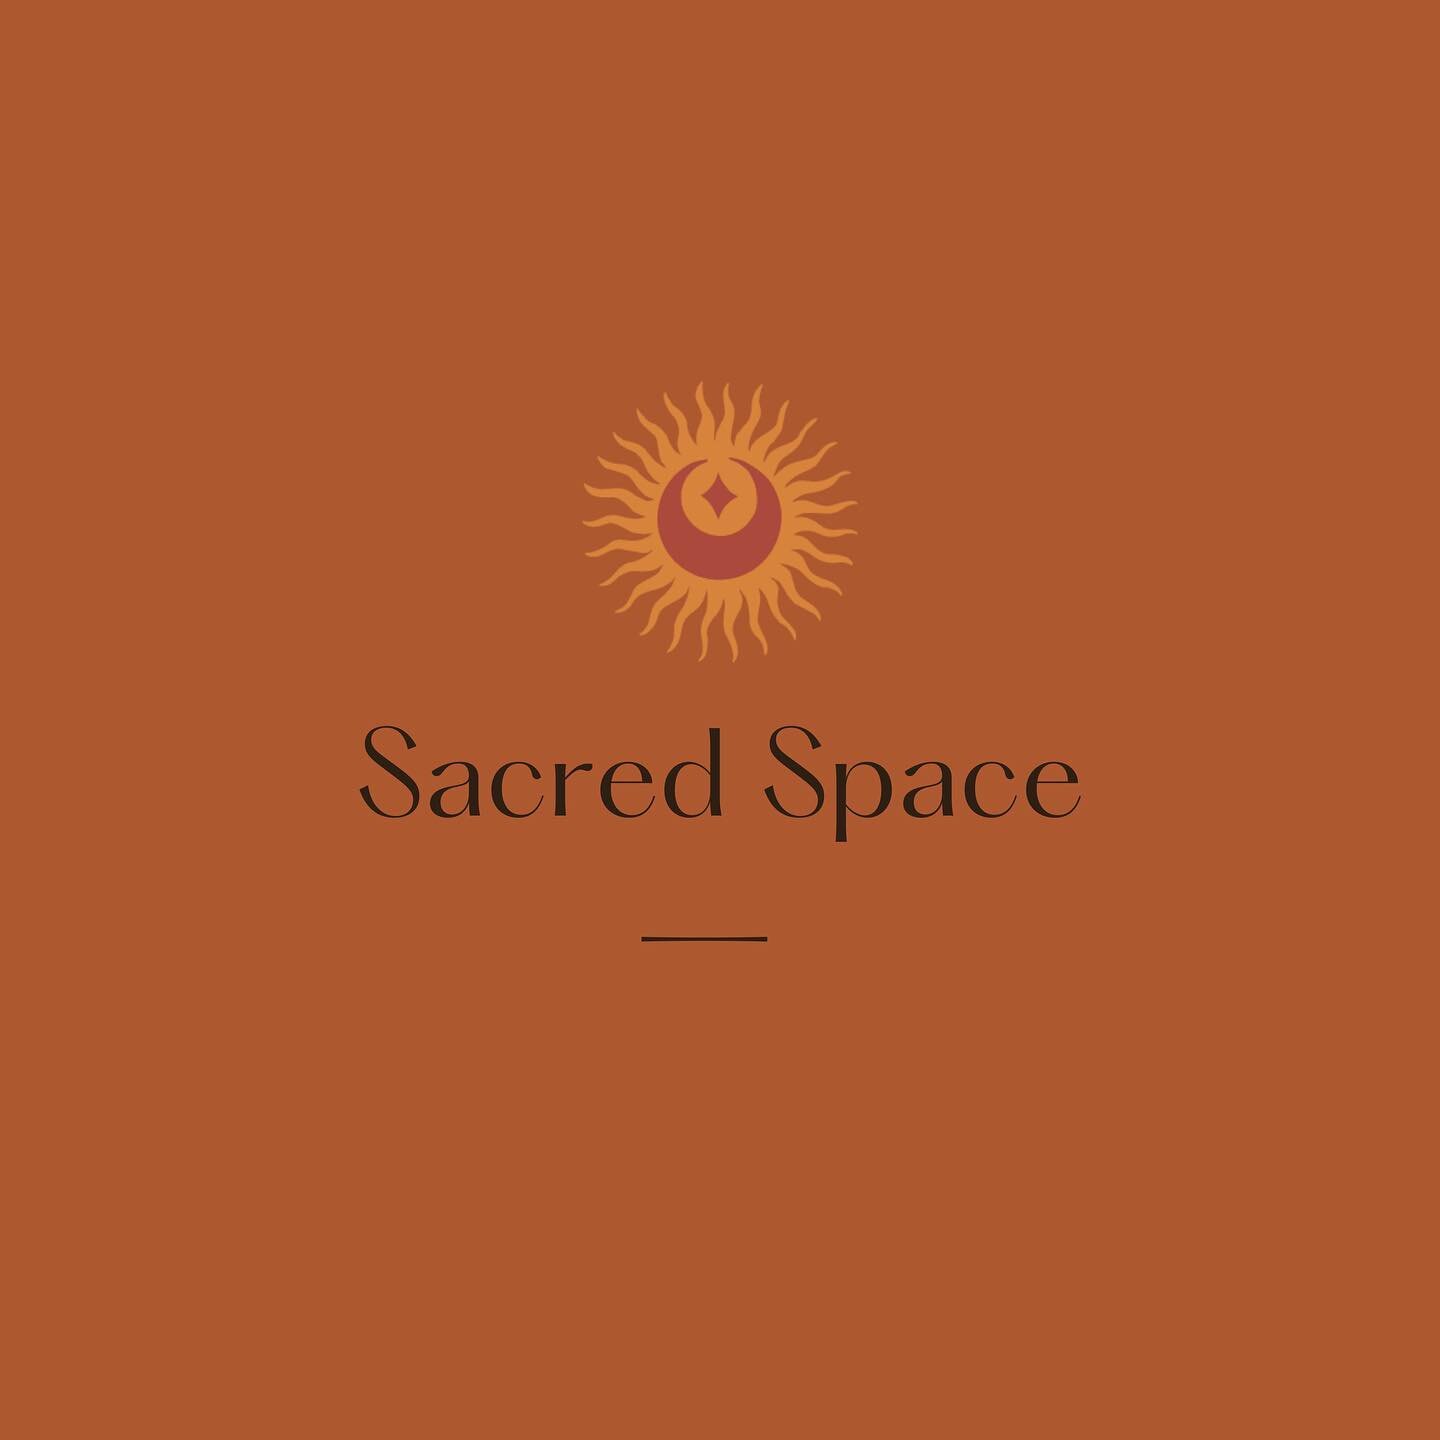 I wholeheartedly believe that we all hold the innate capacity to heal within.

This infinite and enduring inner spark is what I see as the inner sacred space &mdash; the space where love, knowing, &amp; healing reside.
 
Sacred Space is also somethin